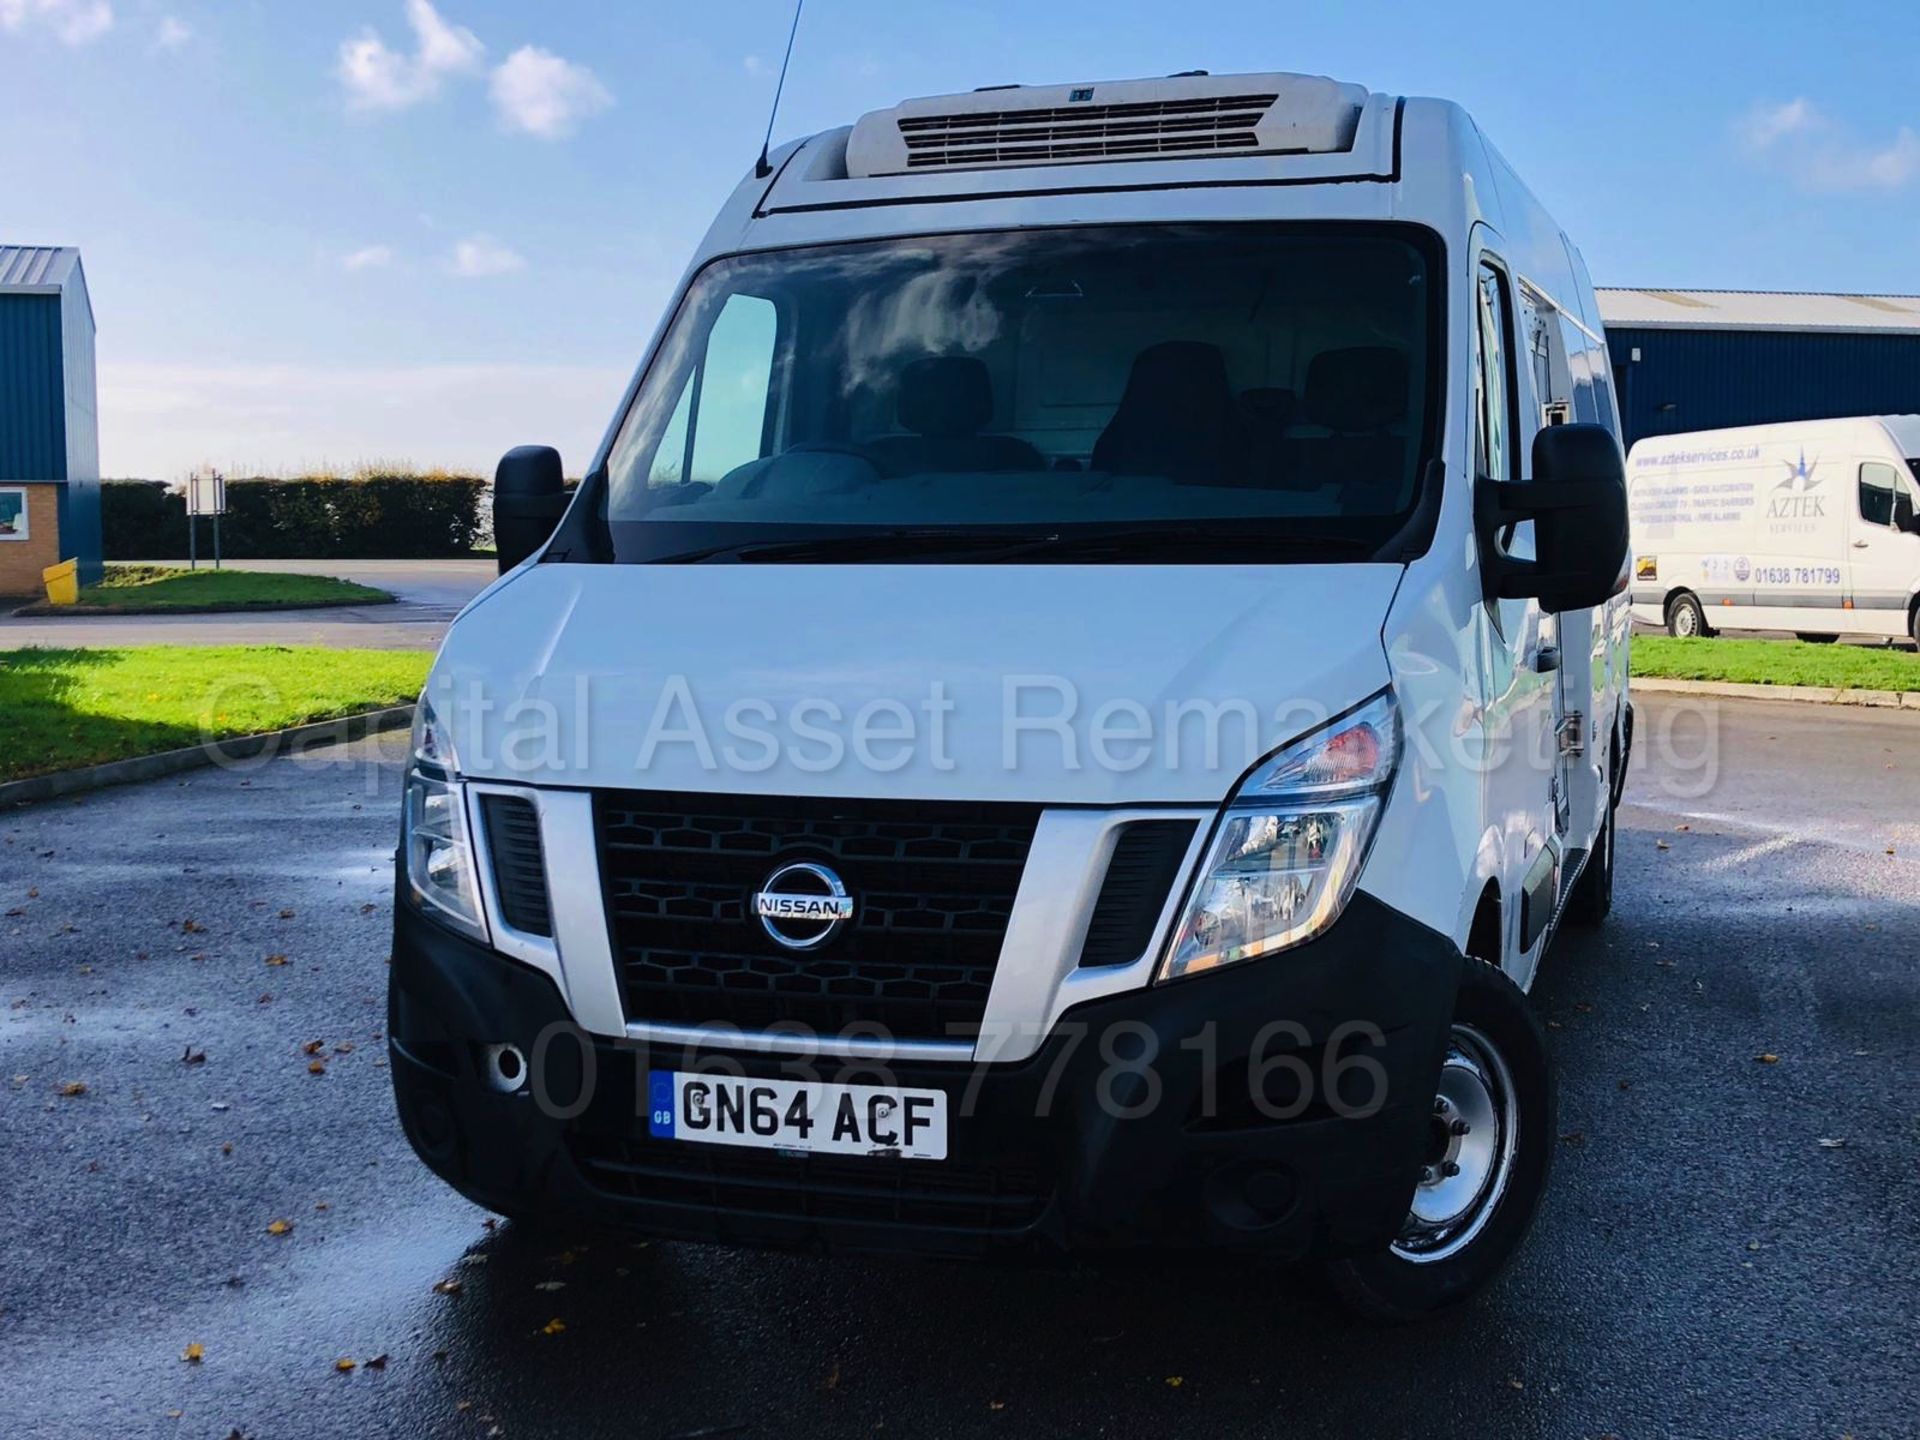 (On Sale) NISSAN NV400 *LWB -REFRIGERATED / PANEL VAN* (2015 MODEL) '2.3 DCI- 6 SPEED' *THERMO KING* - Image 5 of 43